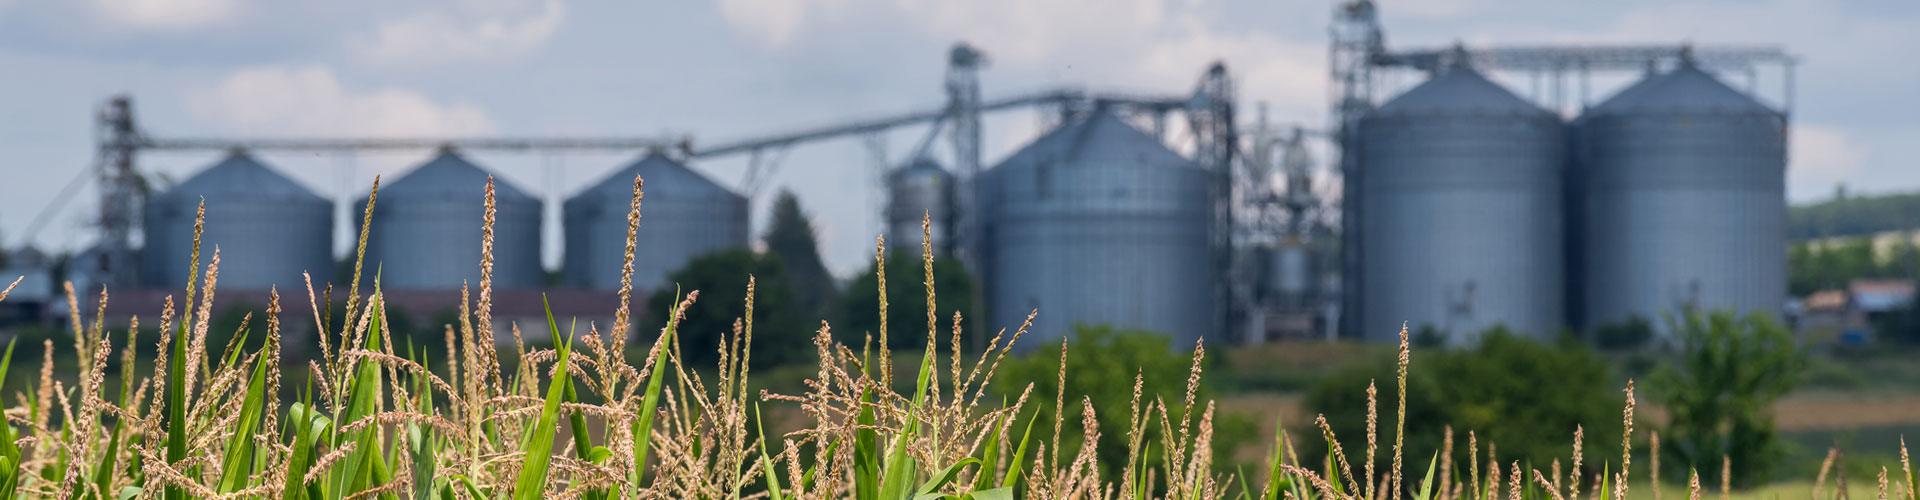 corn field with large silos